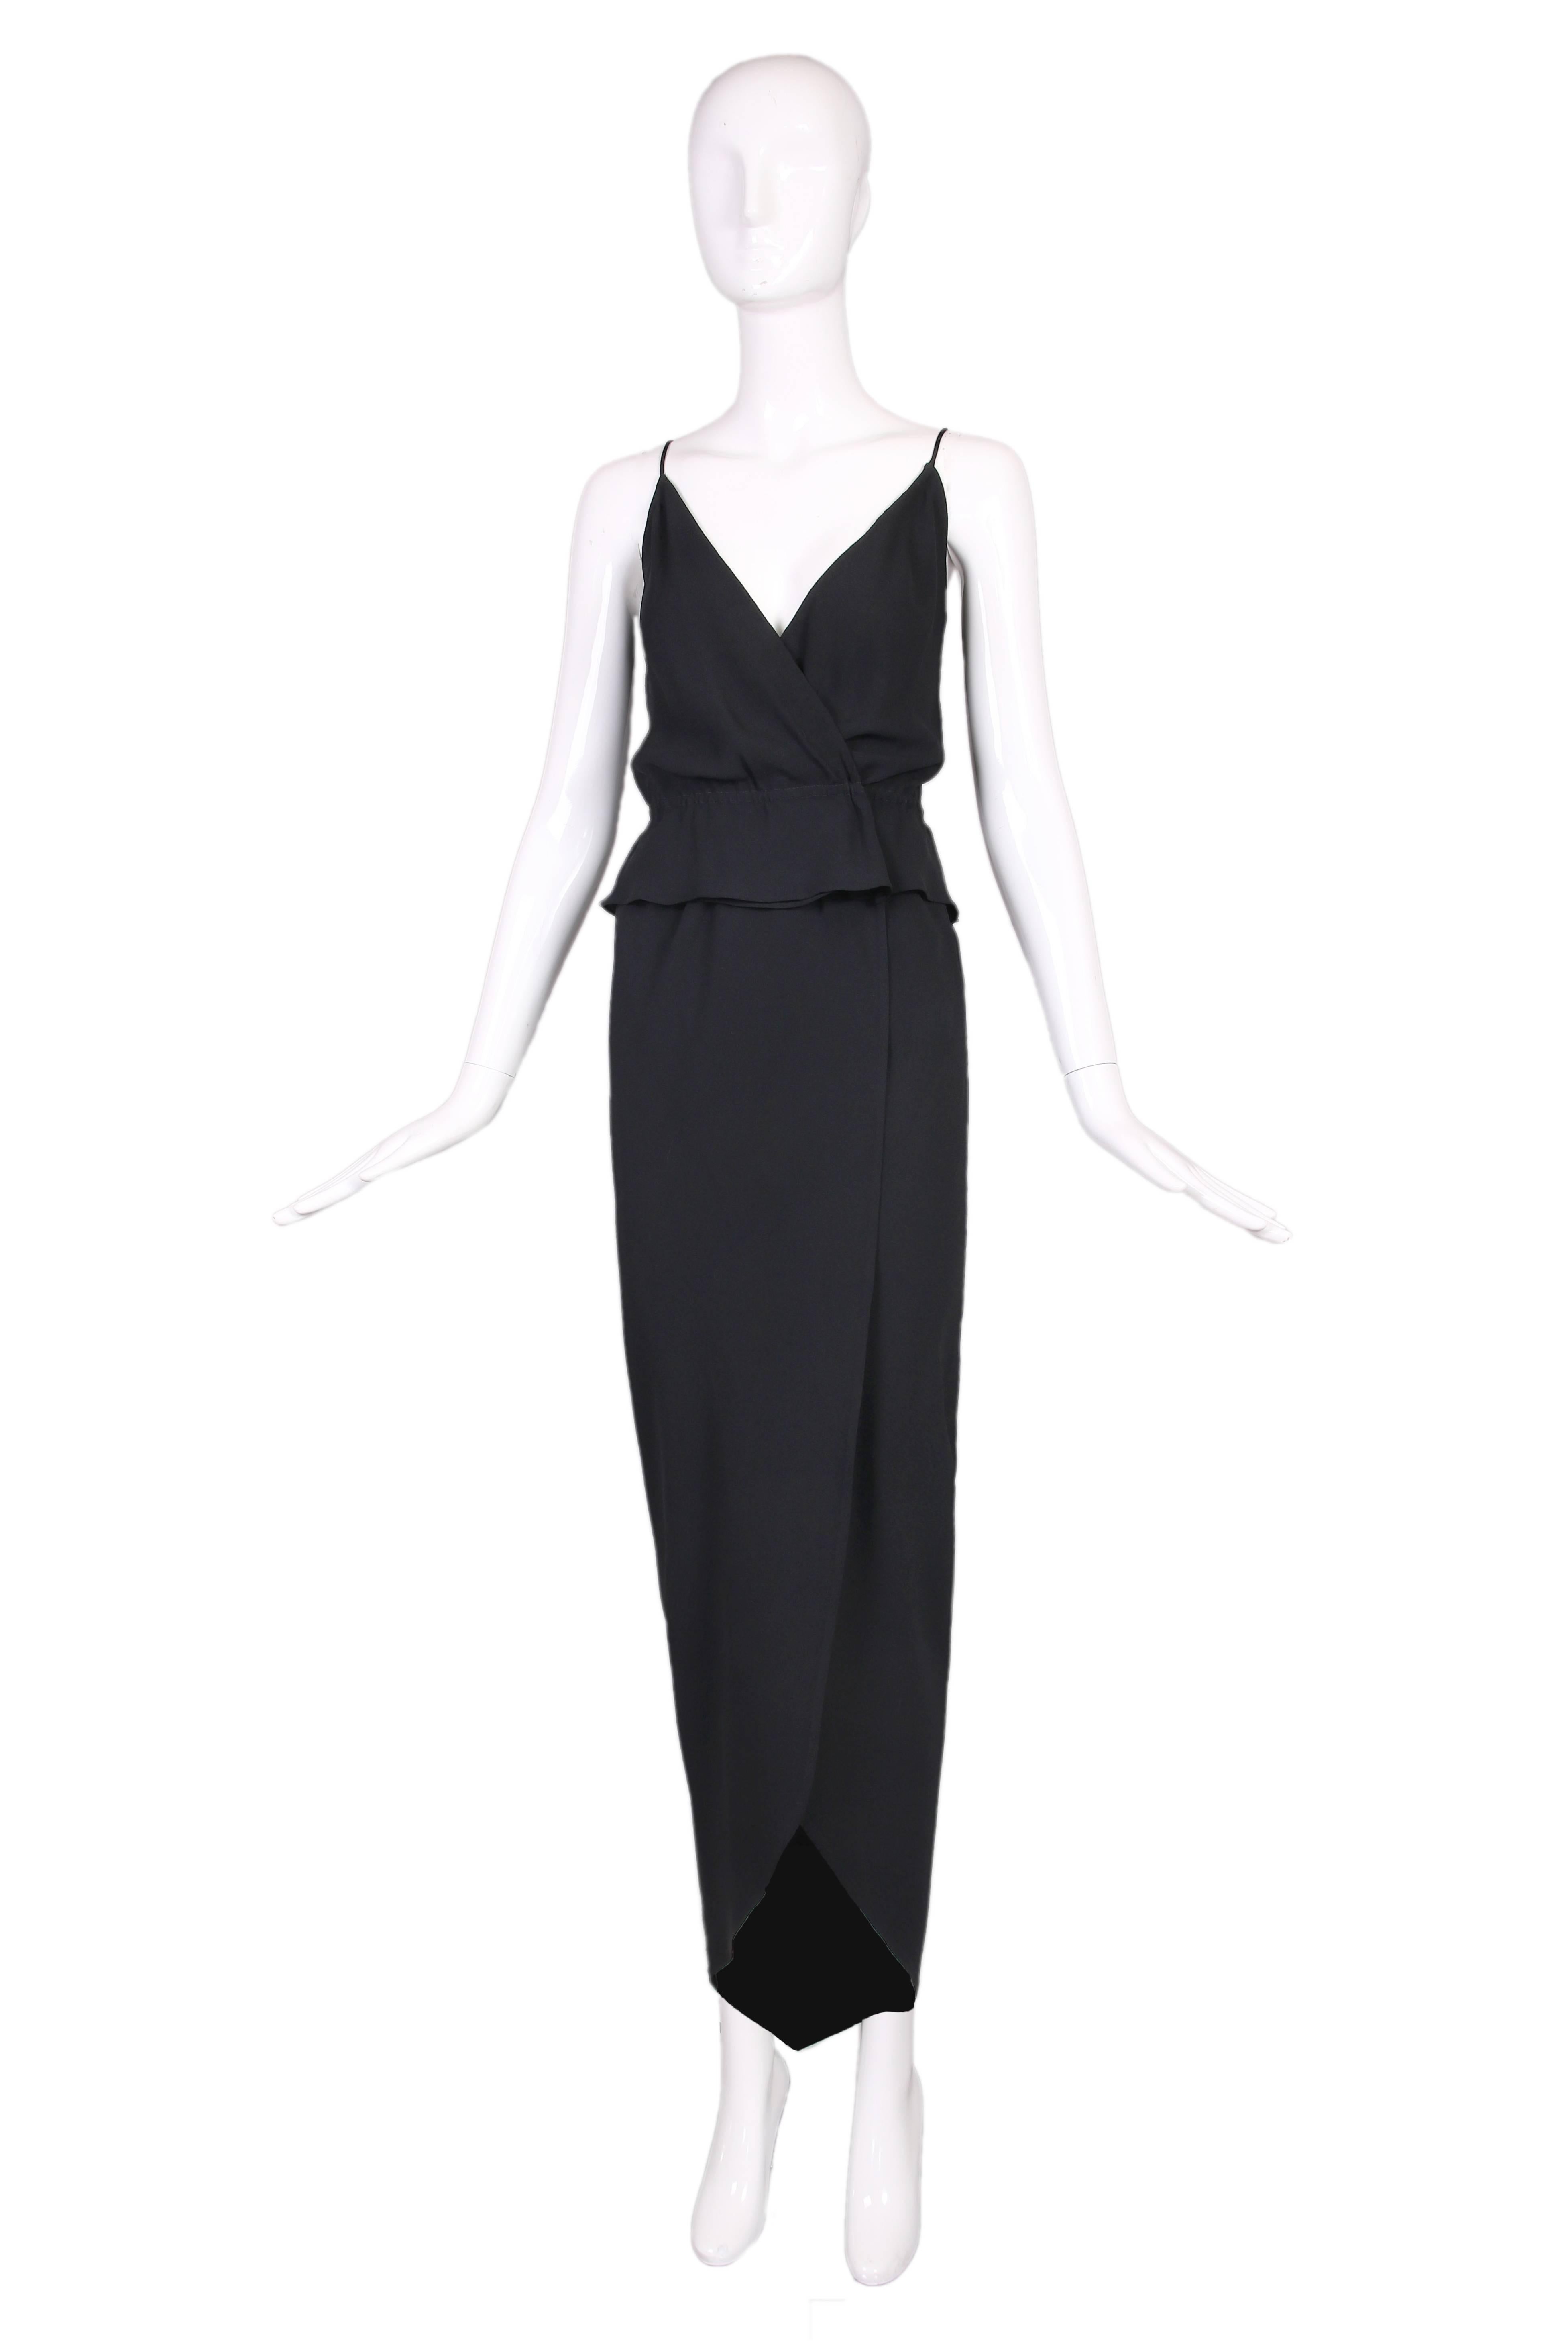 1970's Halston black silk crepe 2-piece consisting of a low V-neck spaghetti strap top and tulip silhouette faux-wrap skirt. In excellent condition.
Top:
Bust - 34"
Waist - 26"
Skirt:
Waist - 28"
Hip - 38"
Length - 48"